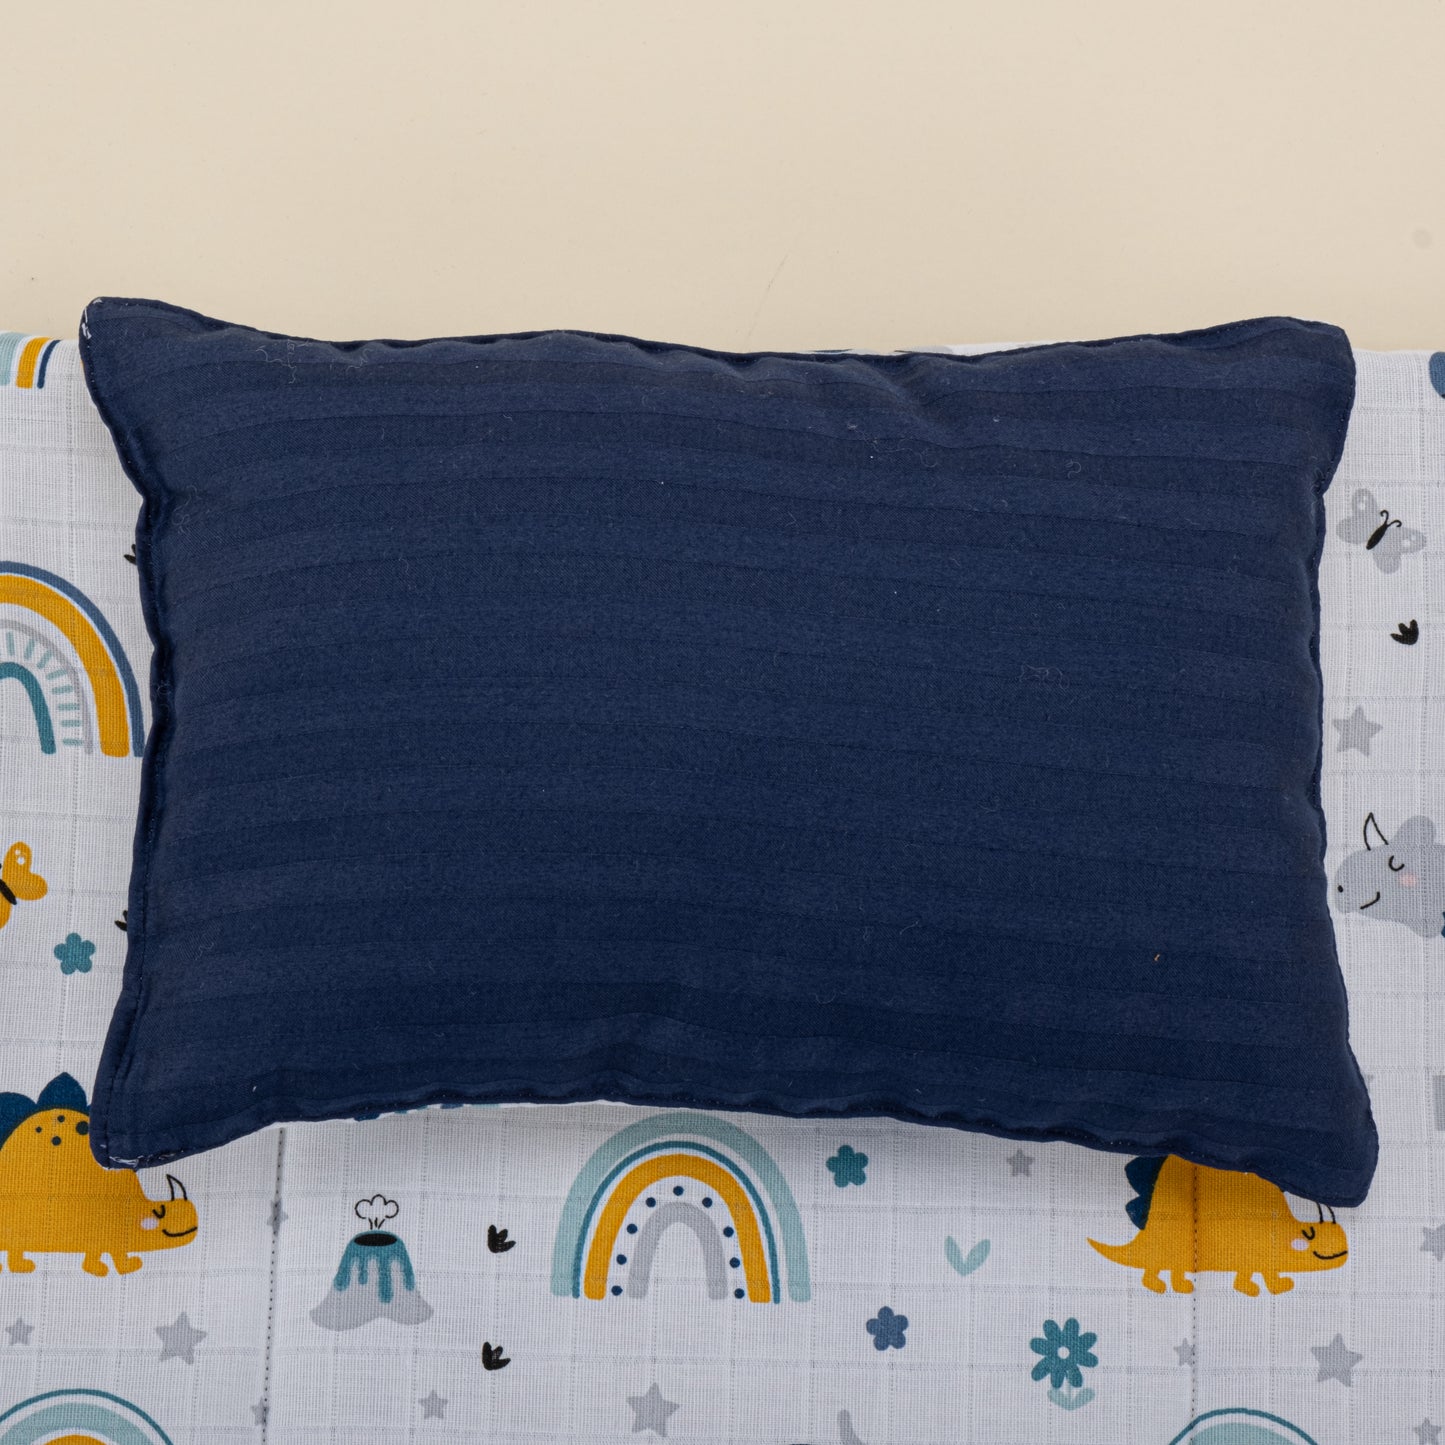 Double Side Changing Pad - Navy Blue Satin - Blue Dino